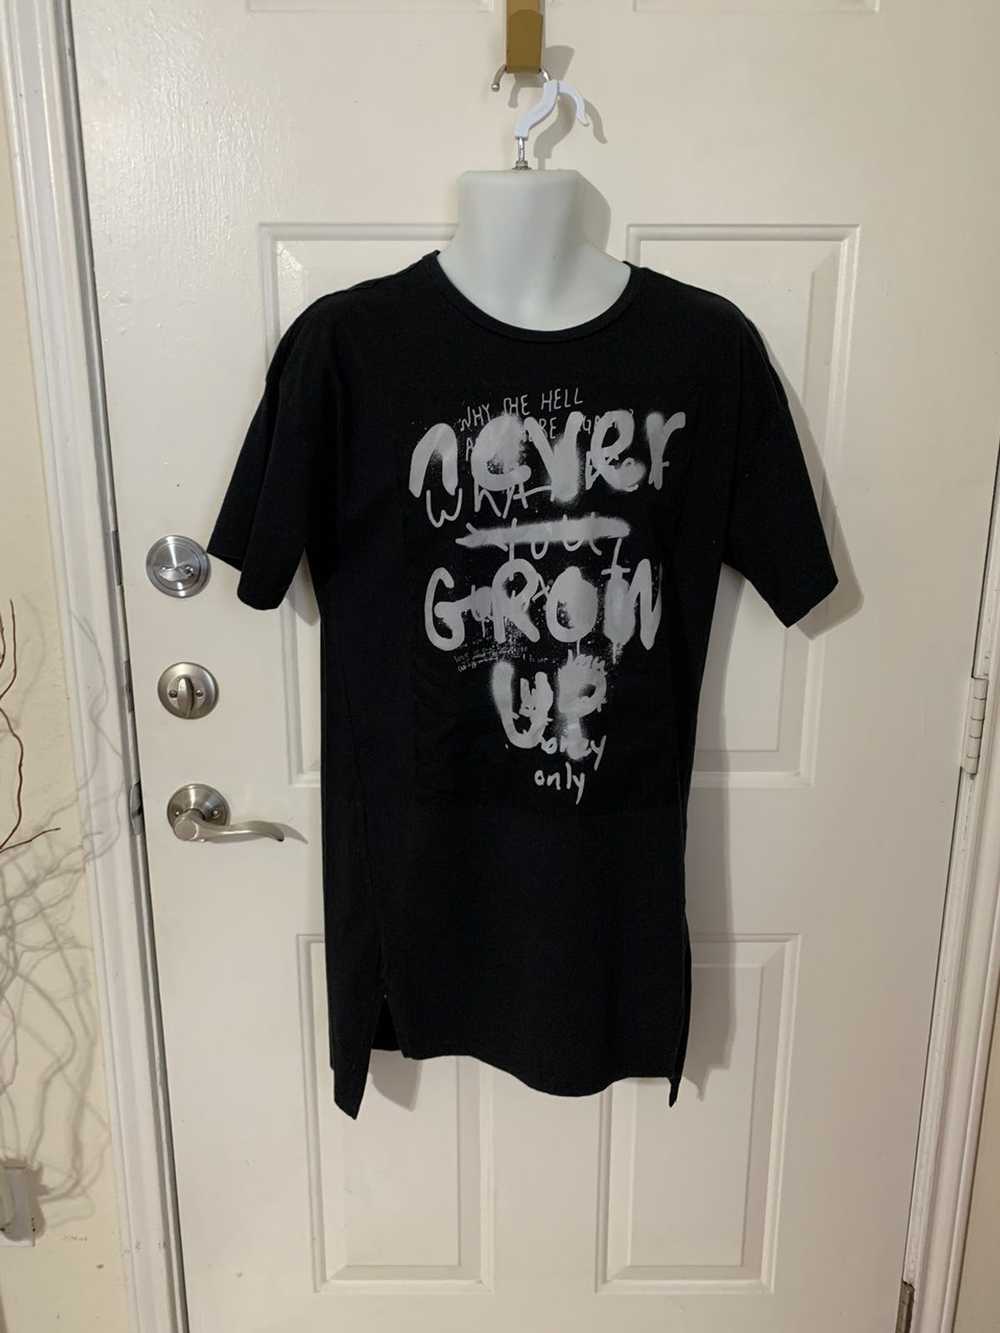 5cm Never grow up Graphic long t shirt - image 1